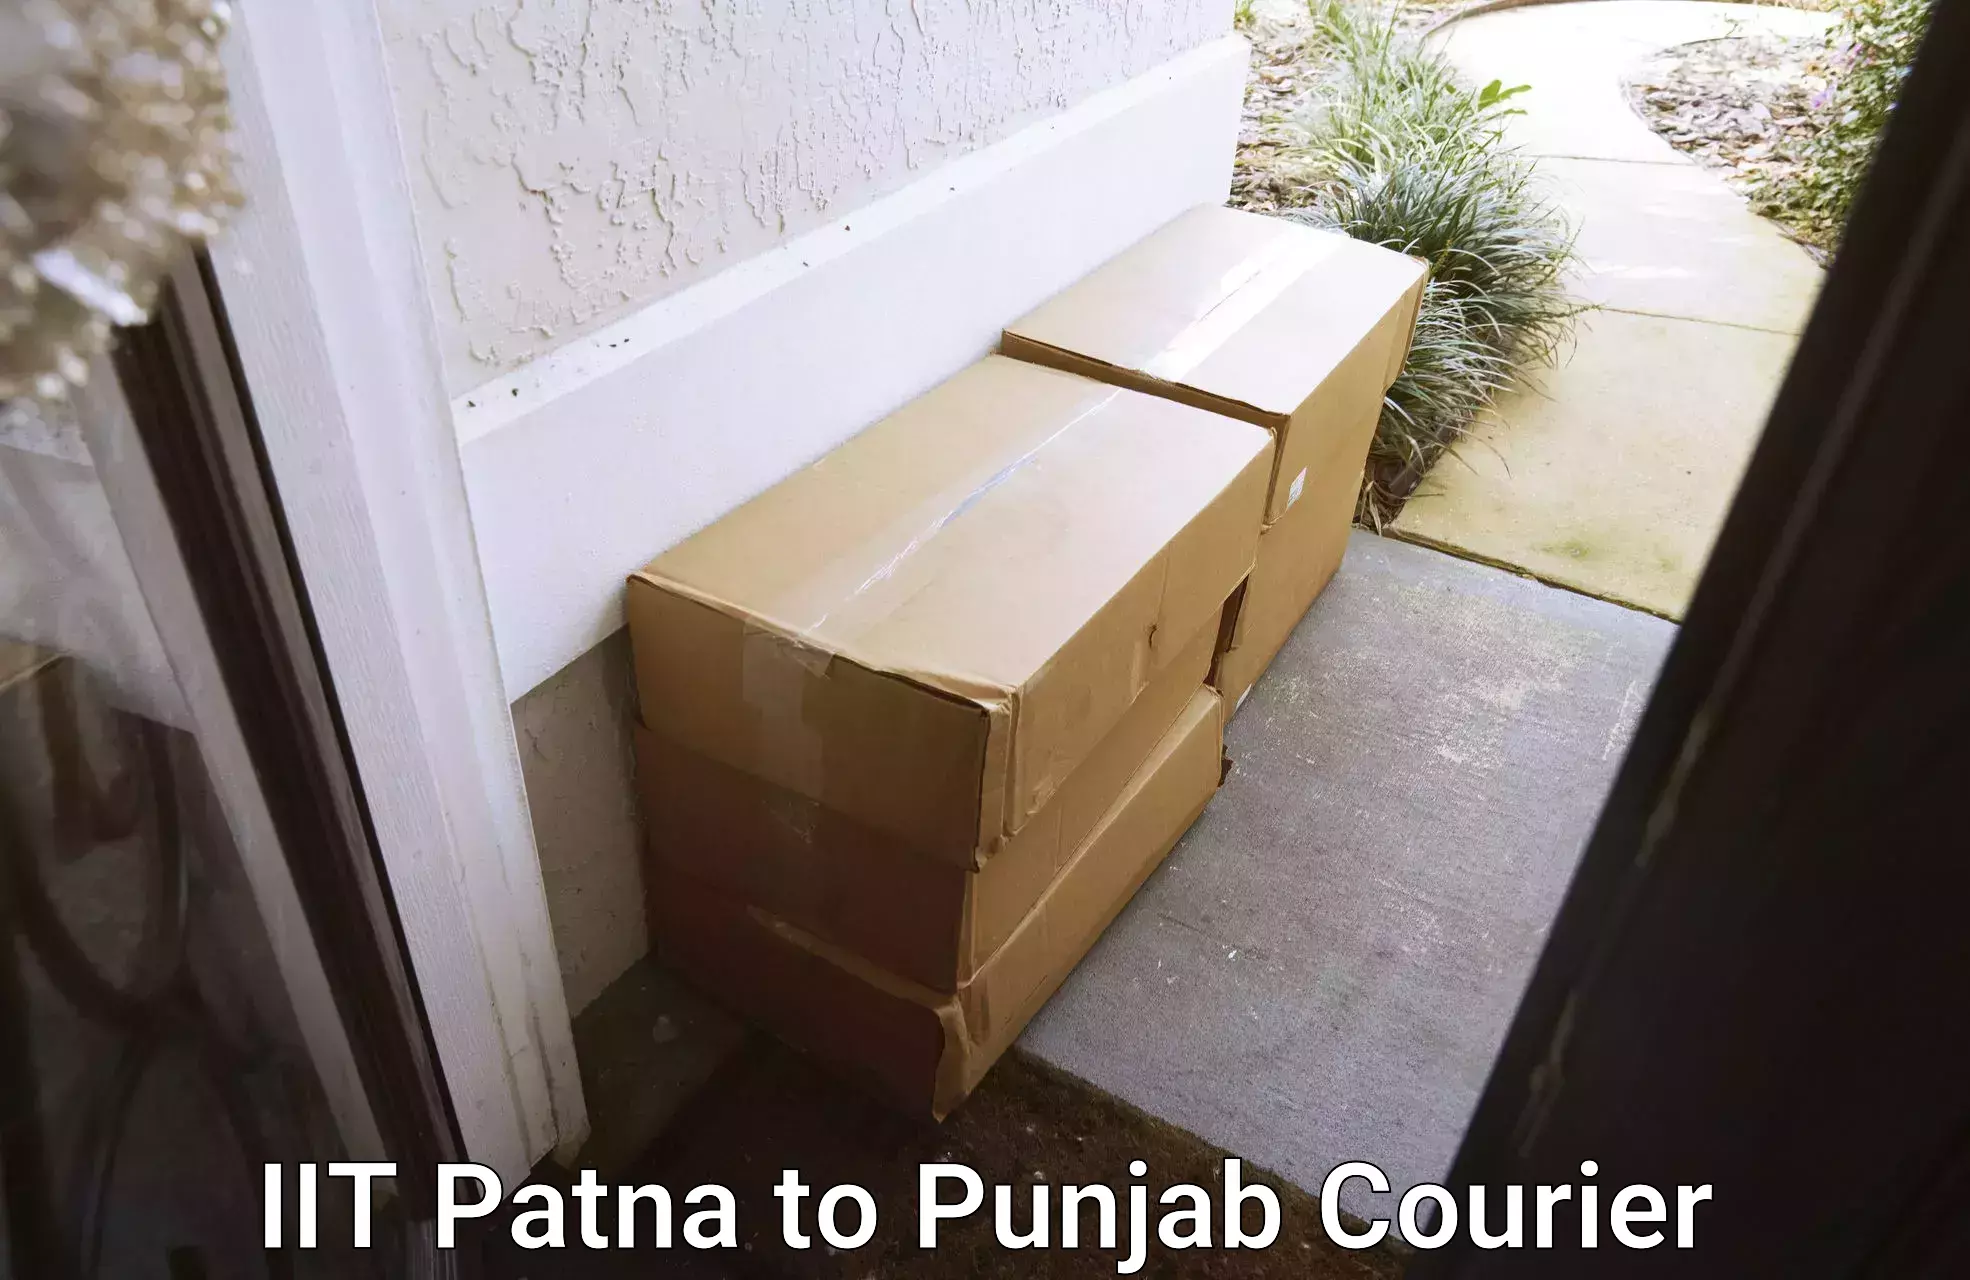 Dependable moving services IIT Patna to Punjab